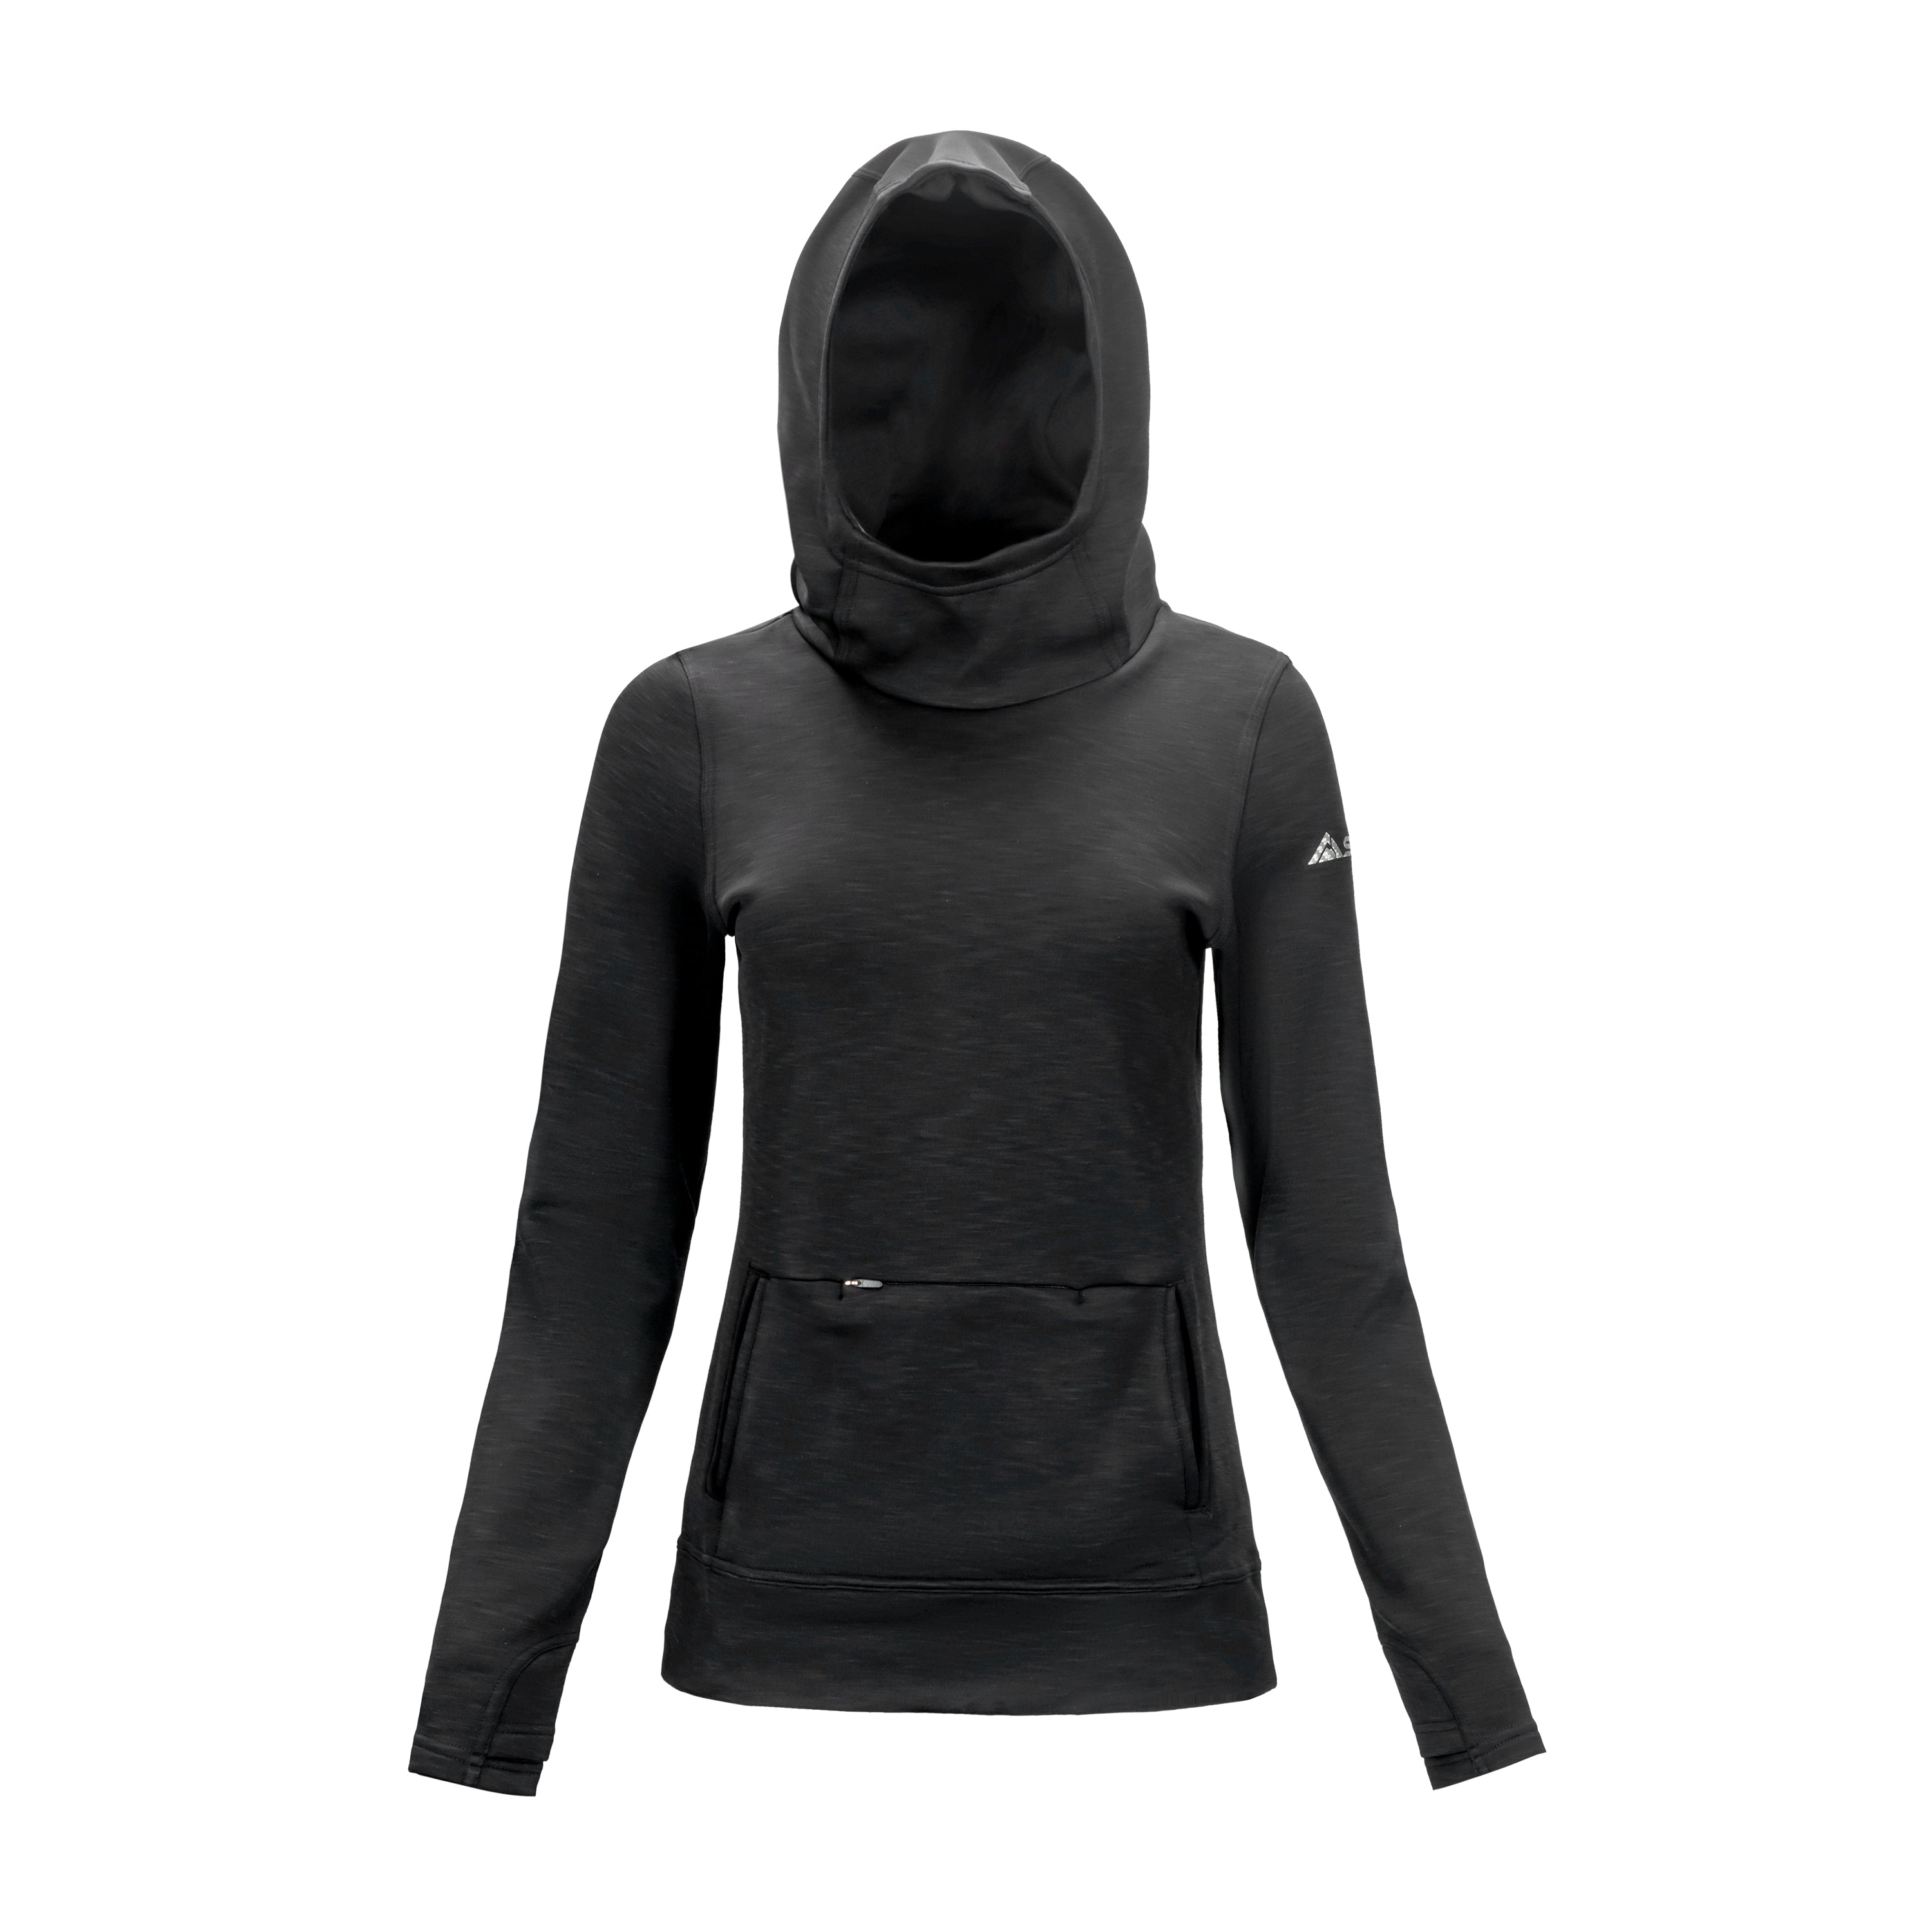 sync-performance-women's-benchmark-hoodie-black-front